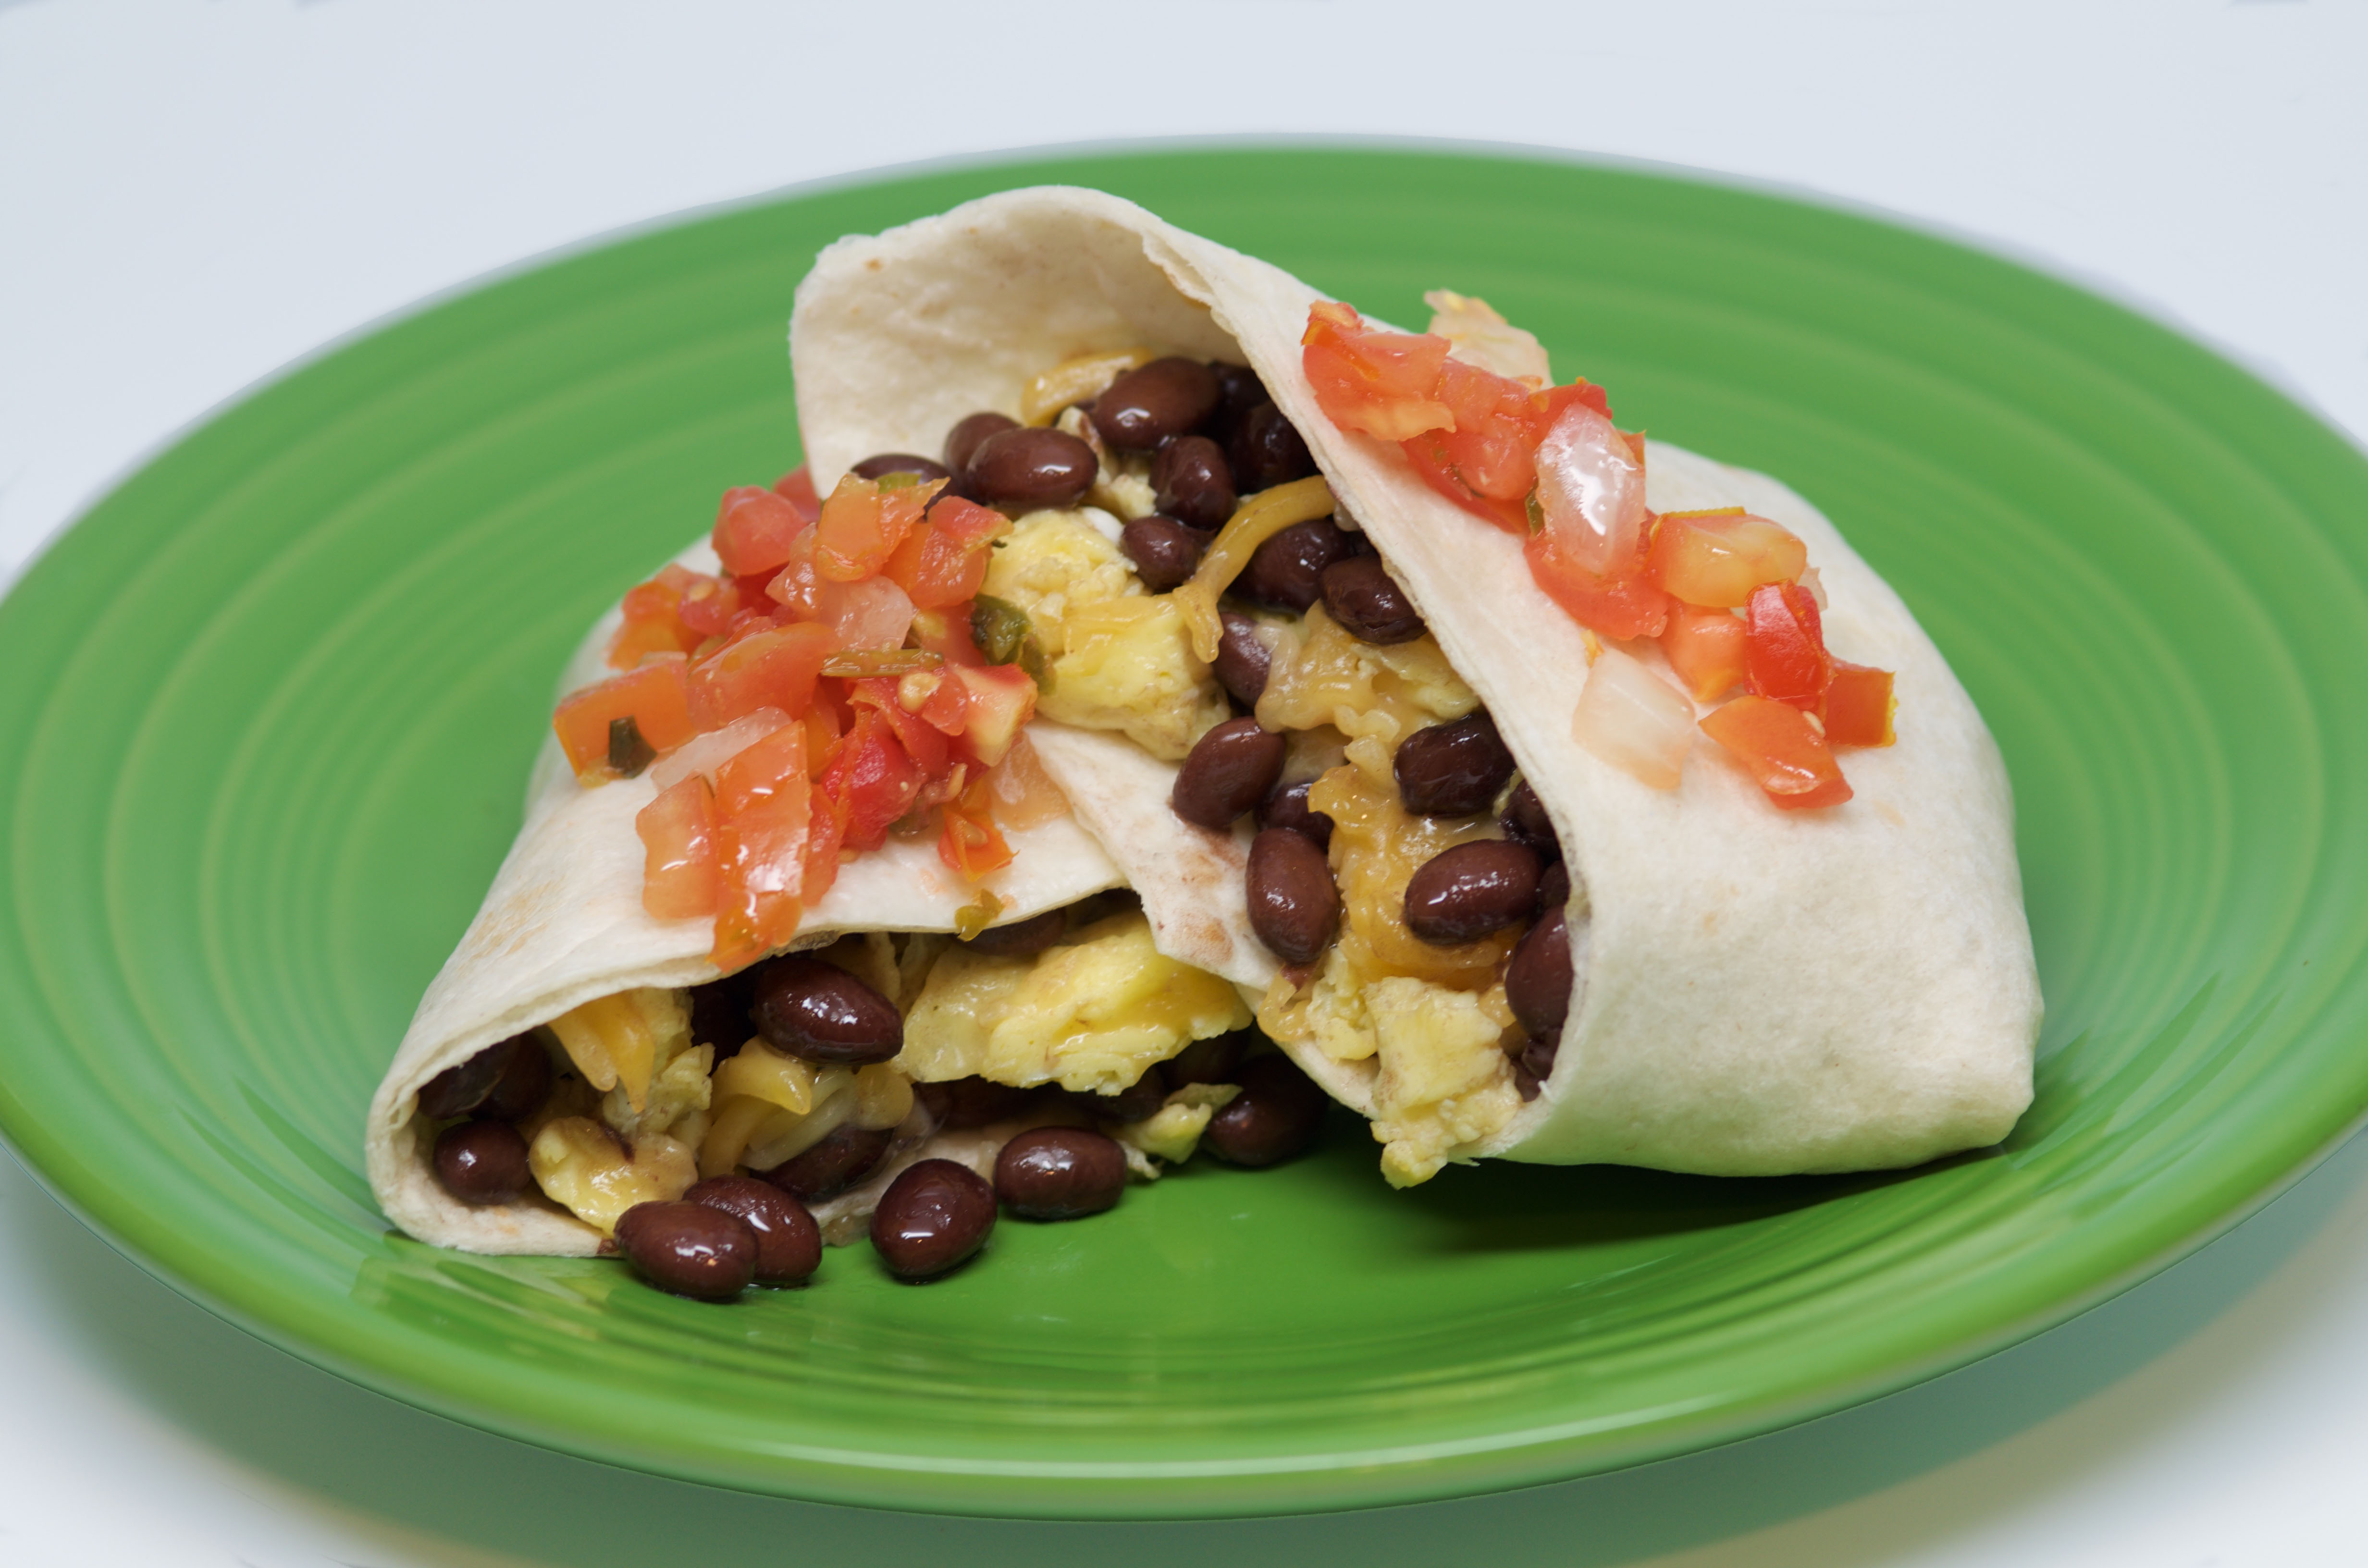 An image depicting the breakfast bean burrito with eggs recipe